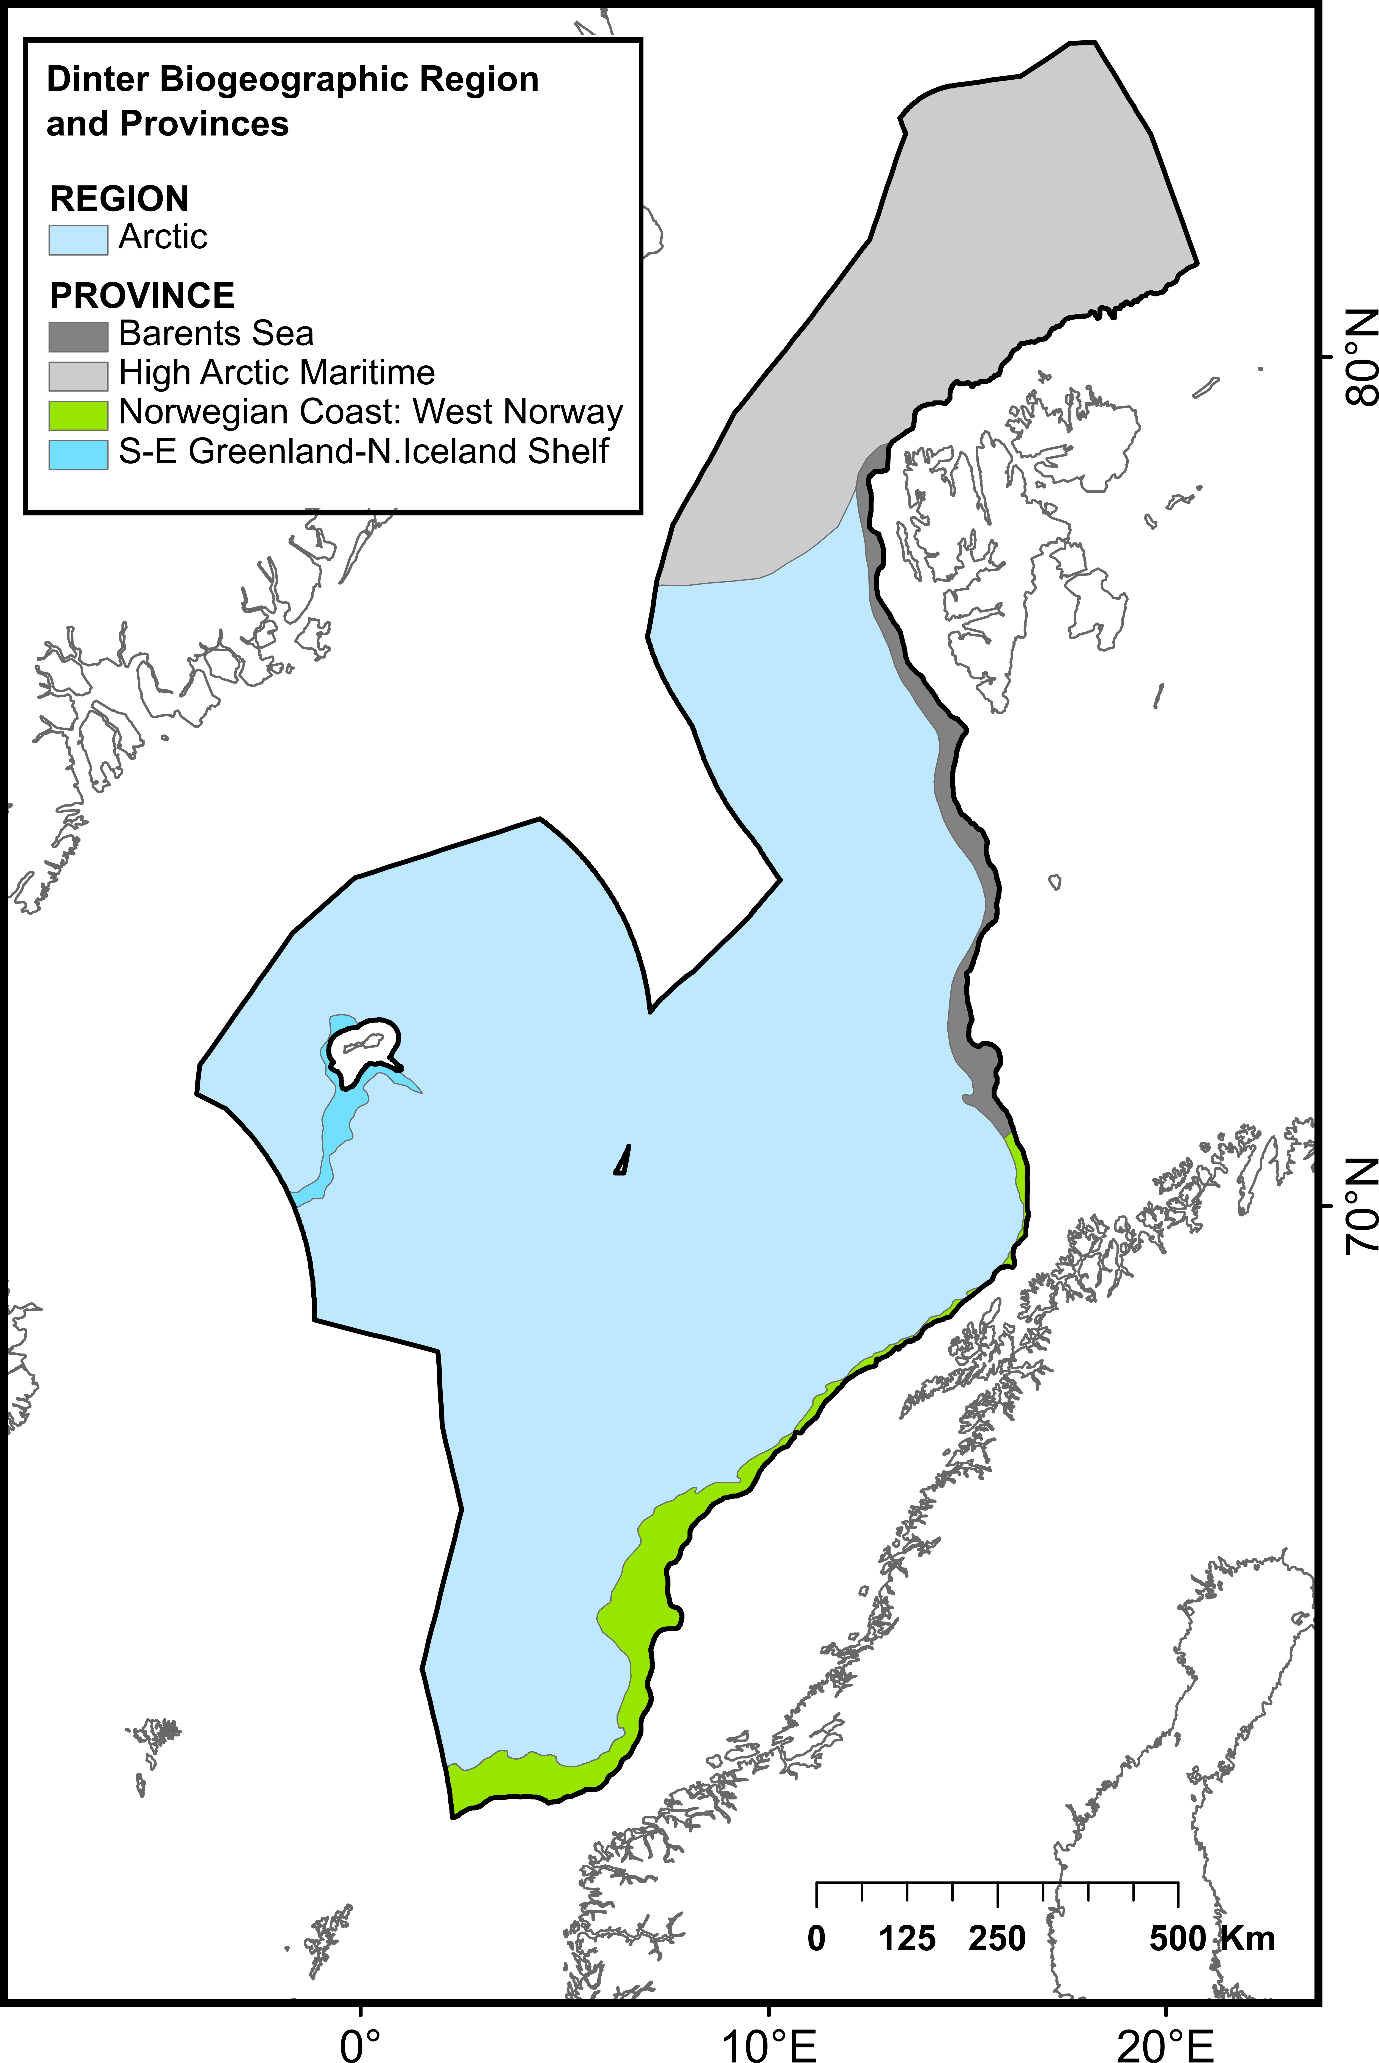 Color codes presents (from top to bottom): Region: Arctic; Provinces: Barents Sea, High Arctic Maritime, Norwegian coast: West Norway, S-E Greenland-N. Icelandic Shelf